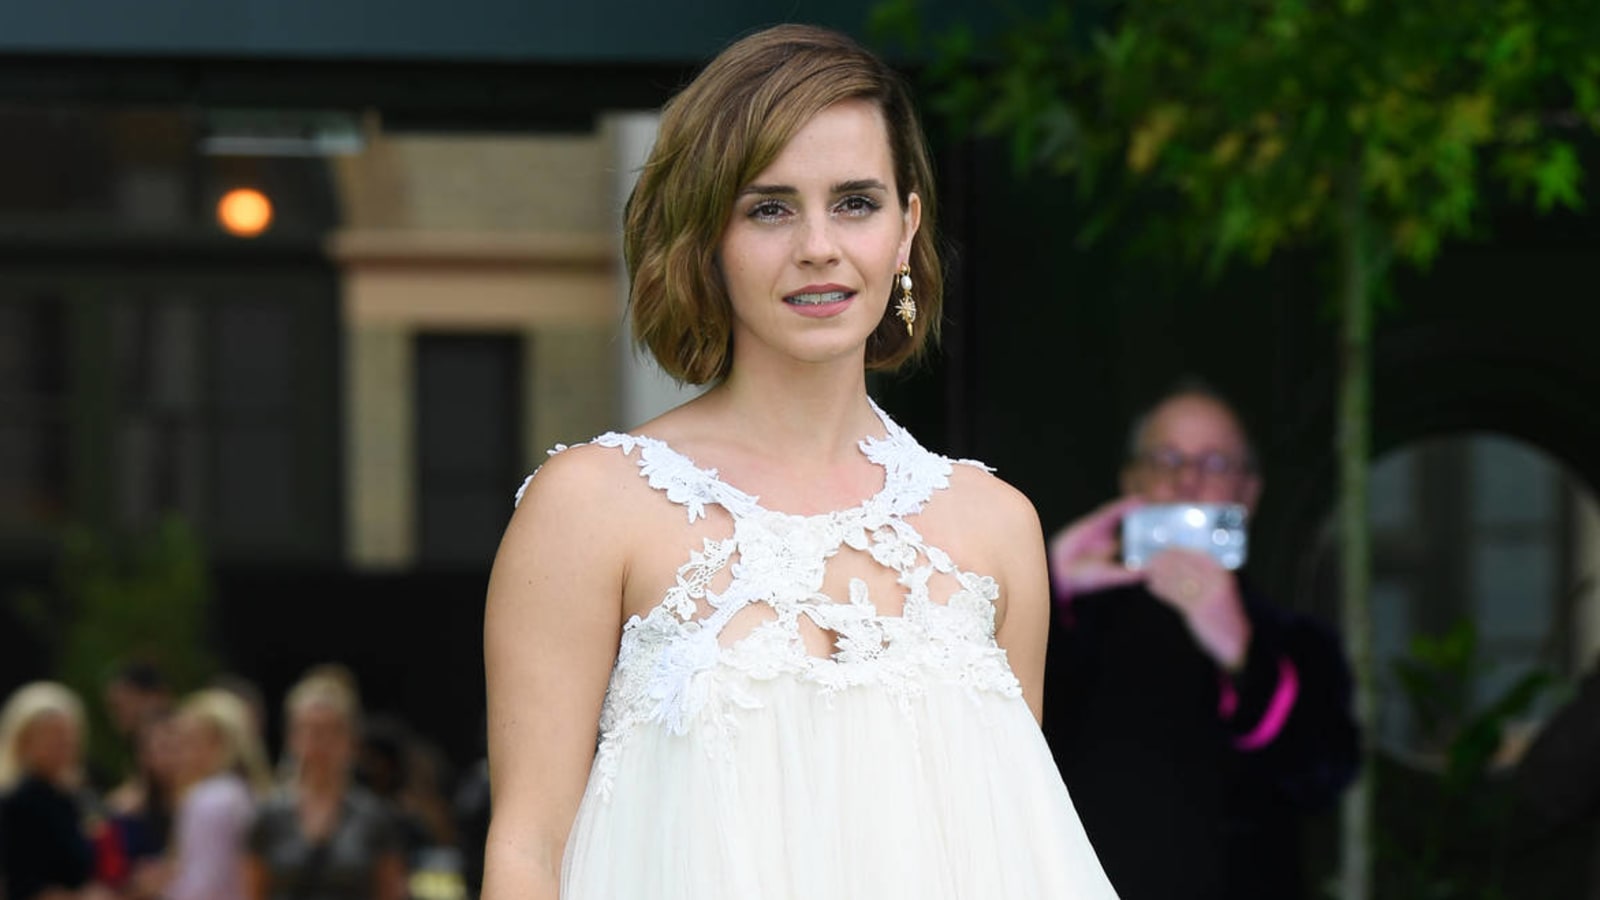 Emma Watson describes crush on Tom Felton during 'Harry Potter' days: 'I fell in love with him'